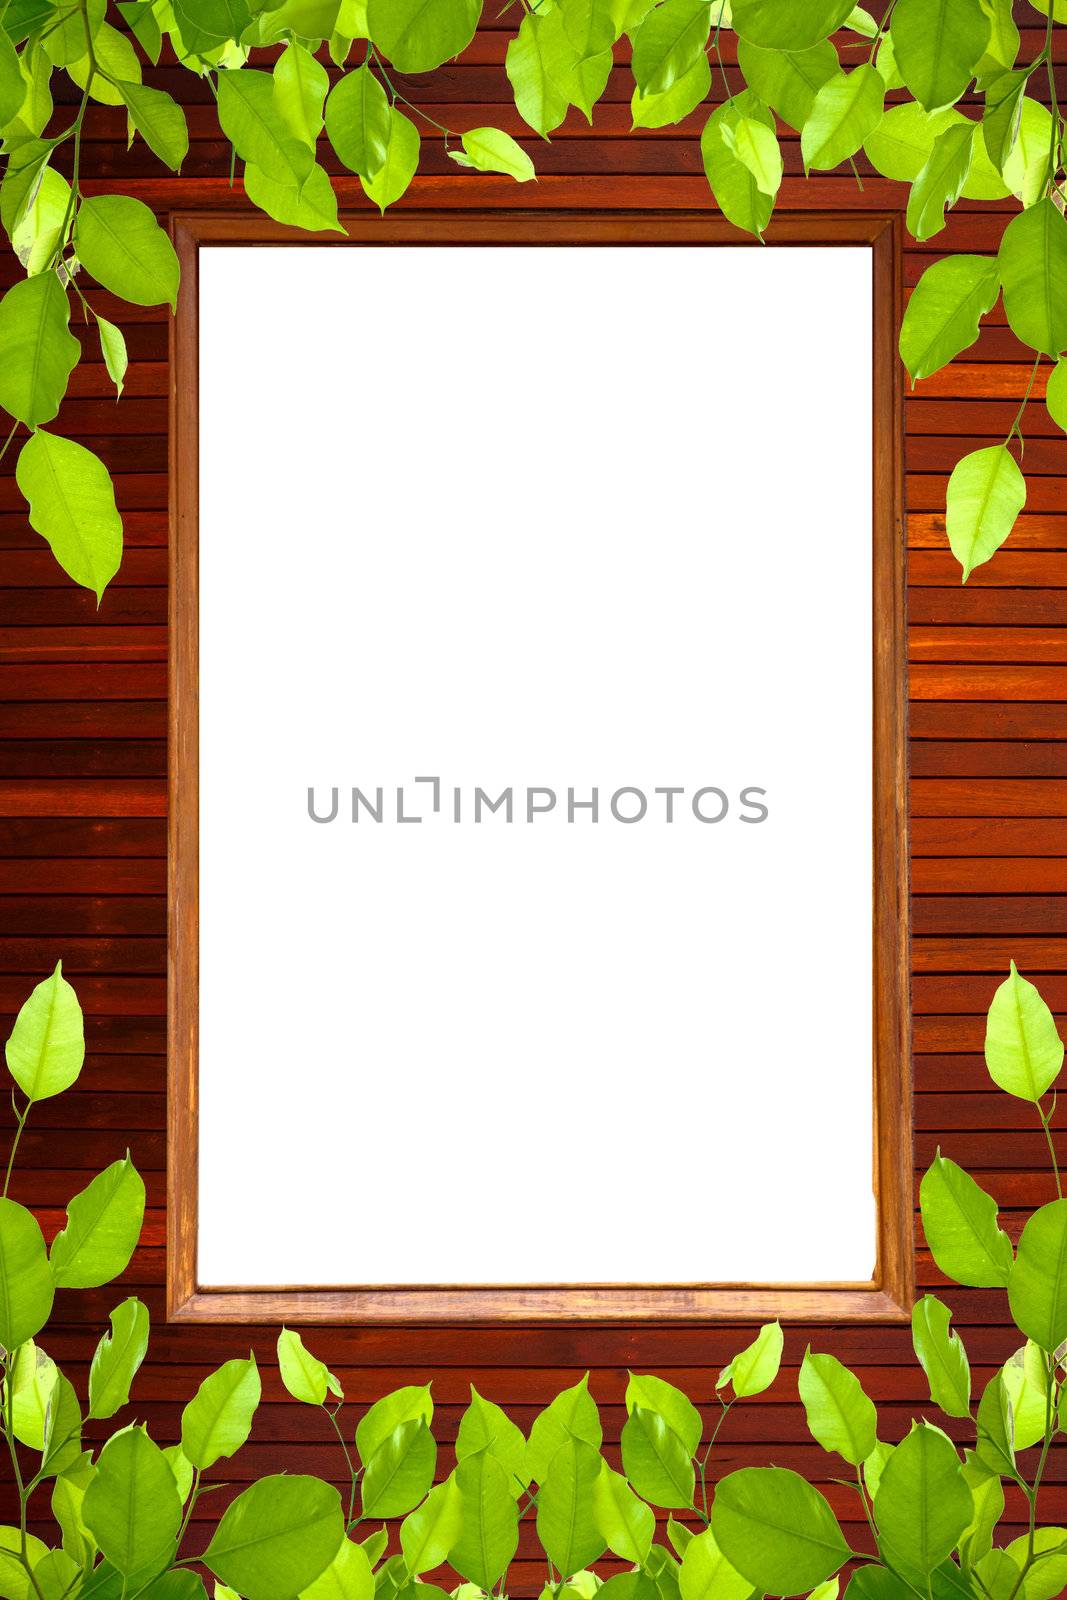 Frame, surrounded by green leaves.